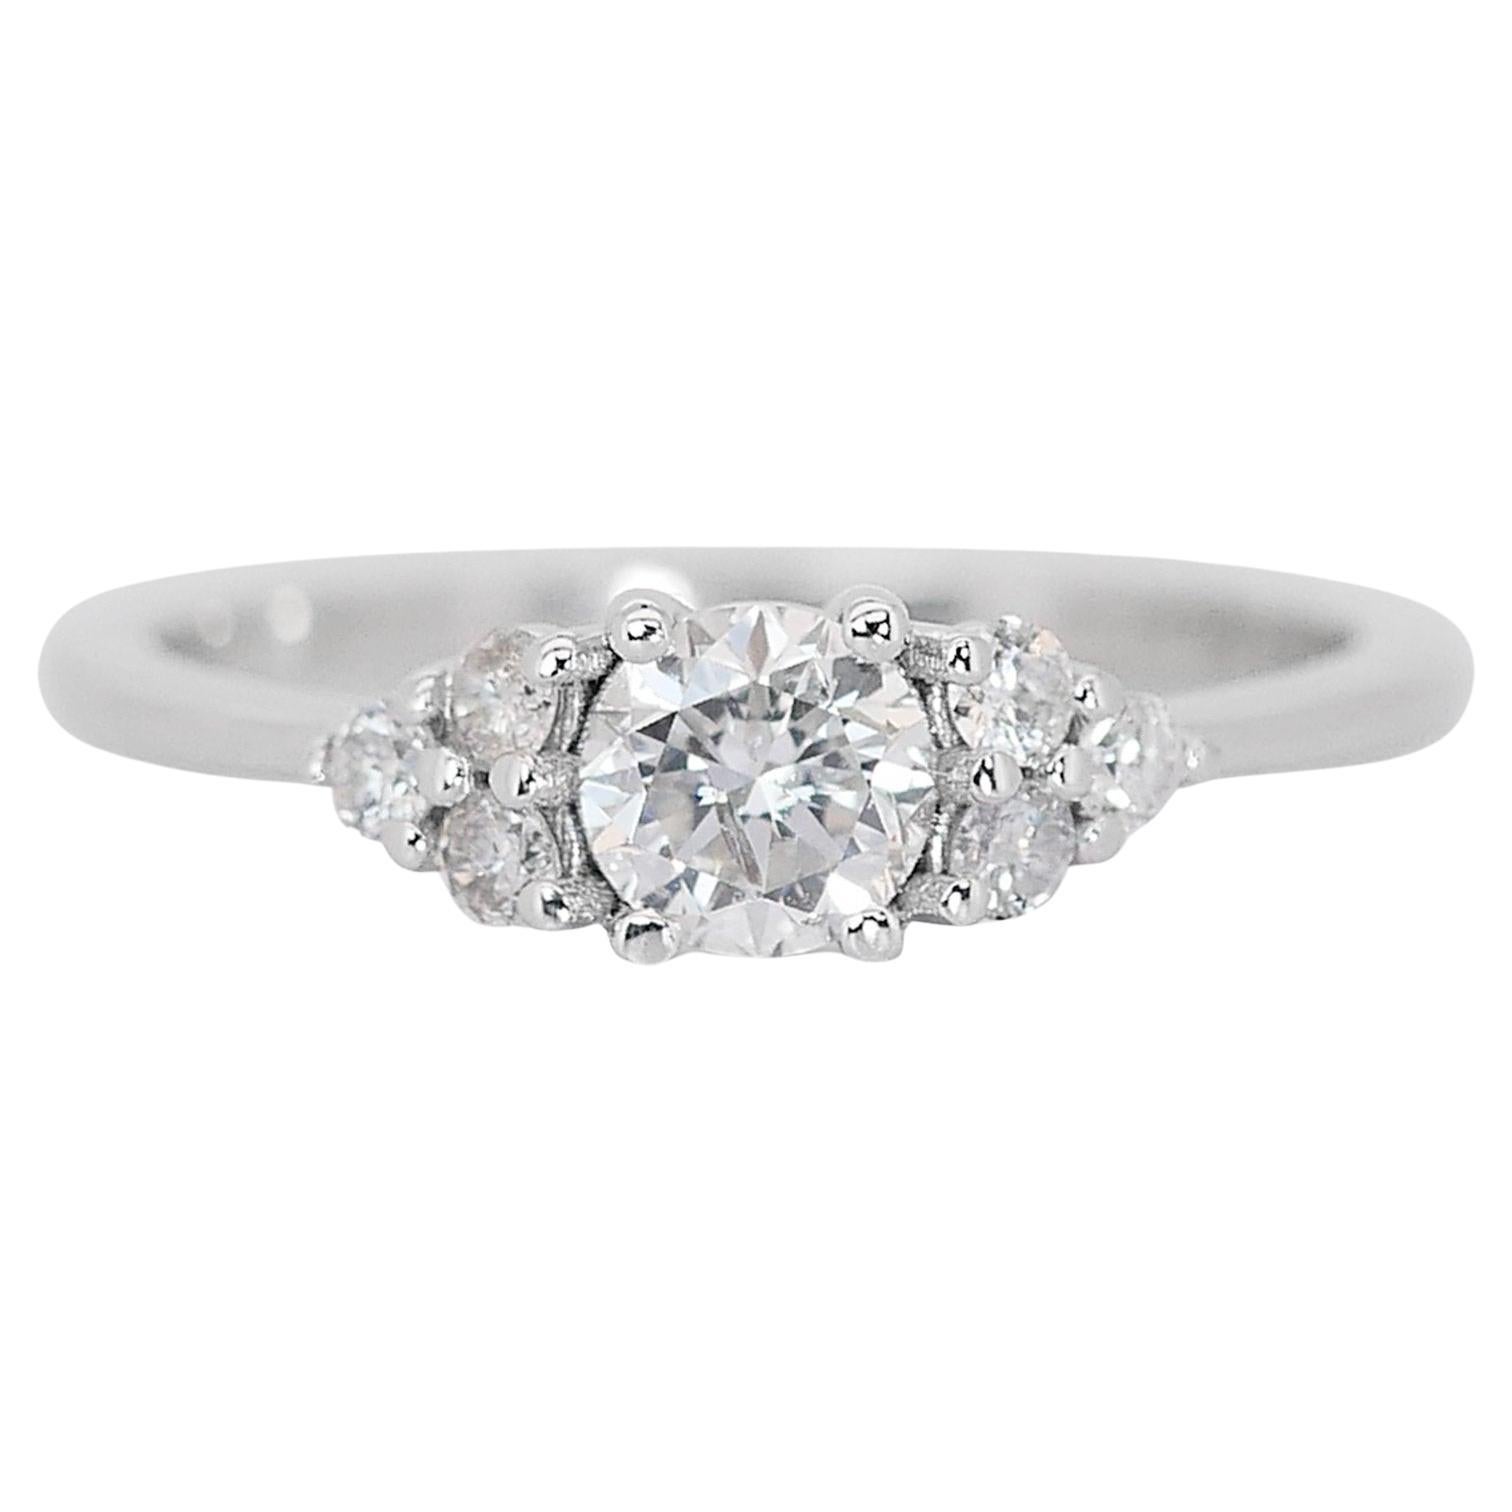 Captivating 1.25ct Diamonds 7-Stone Ring in 18k White Gold - GIA Certified For Sale